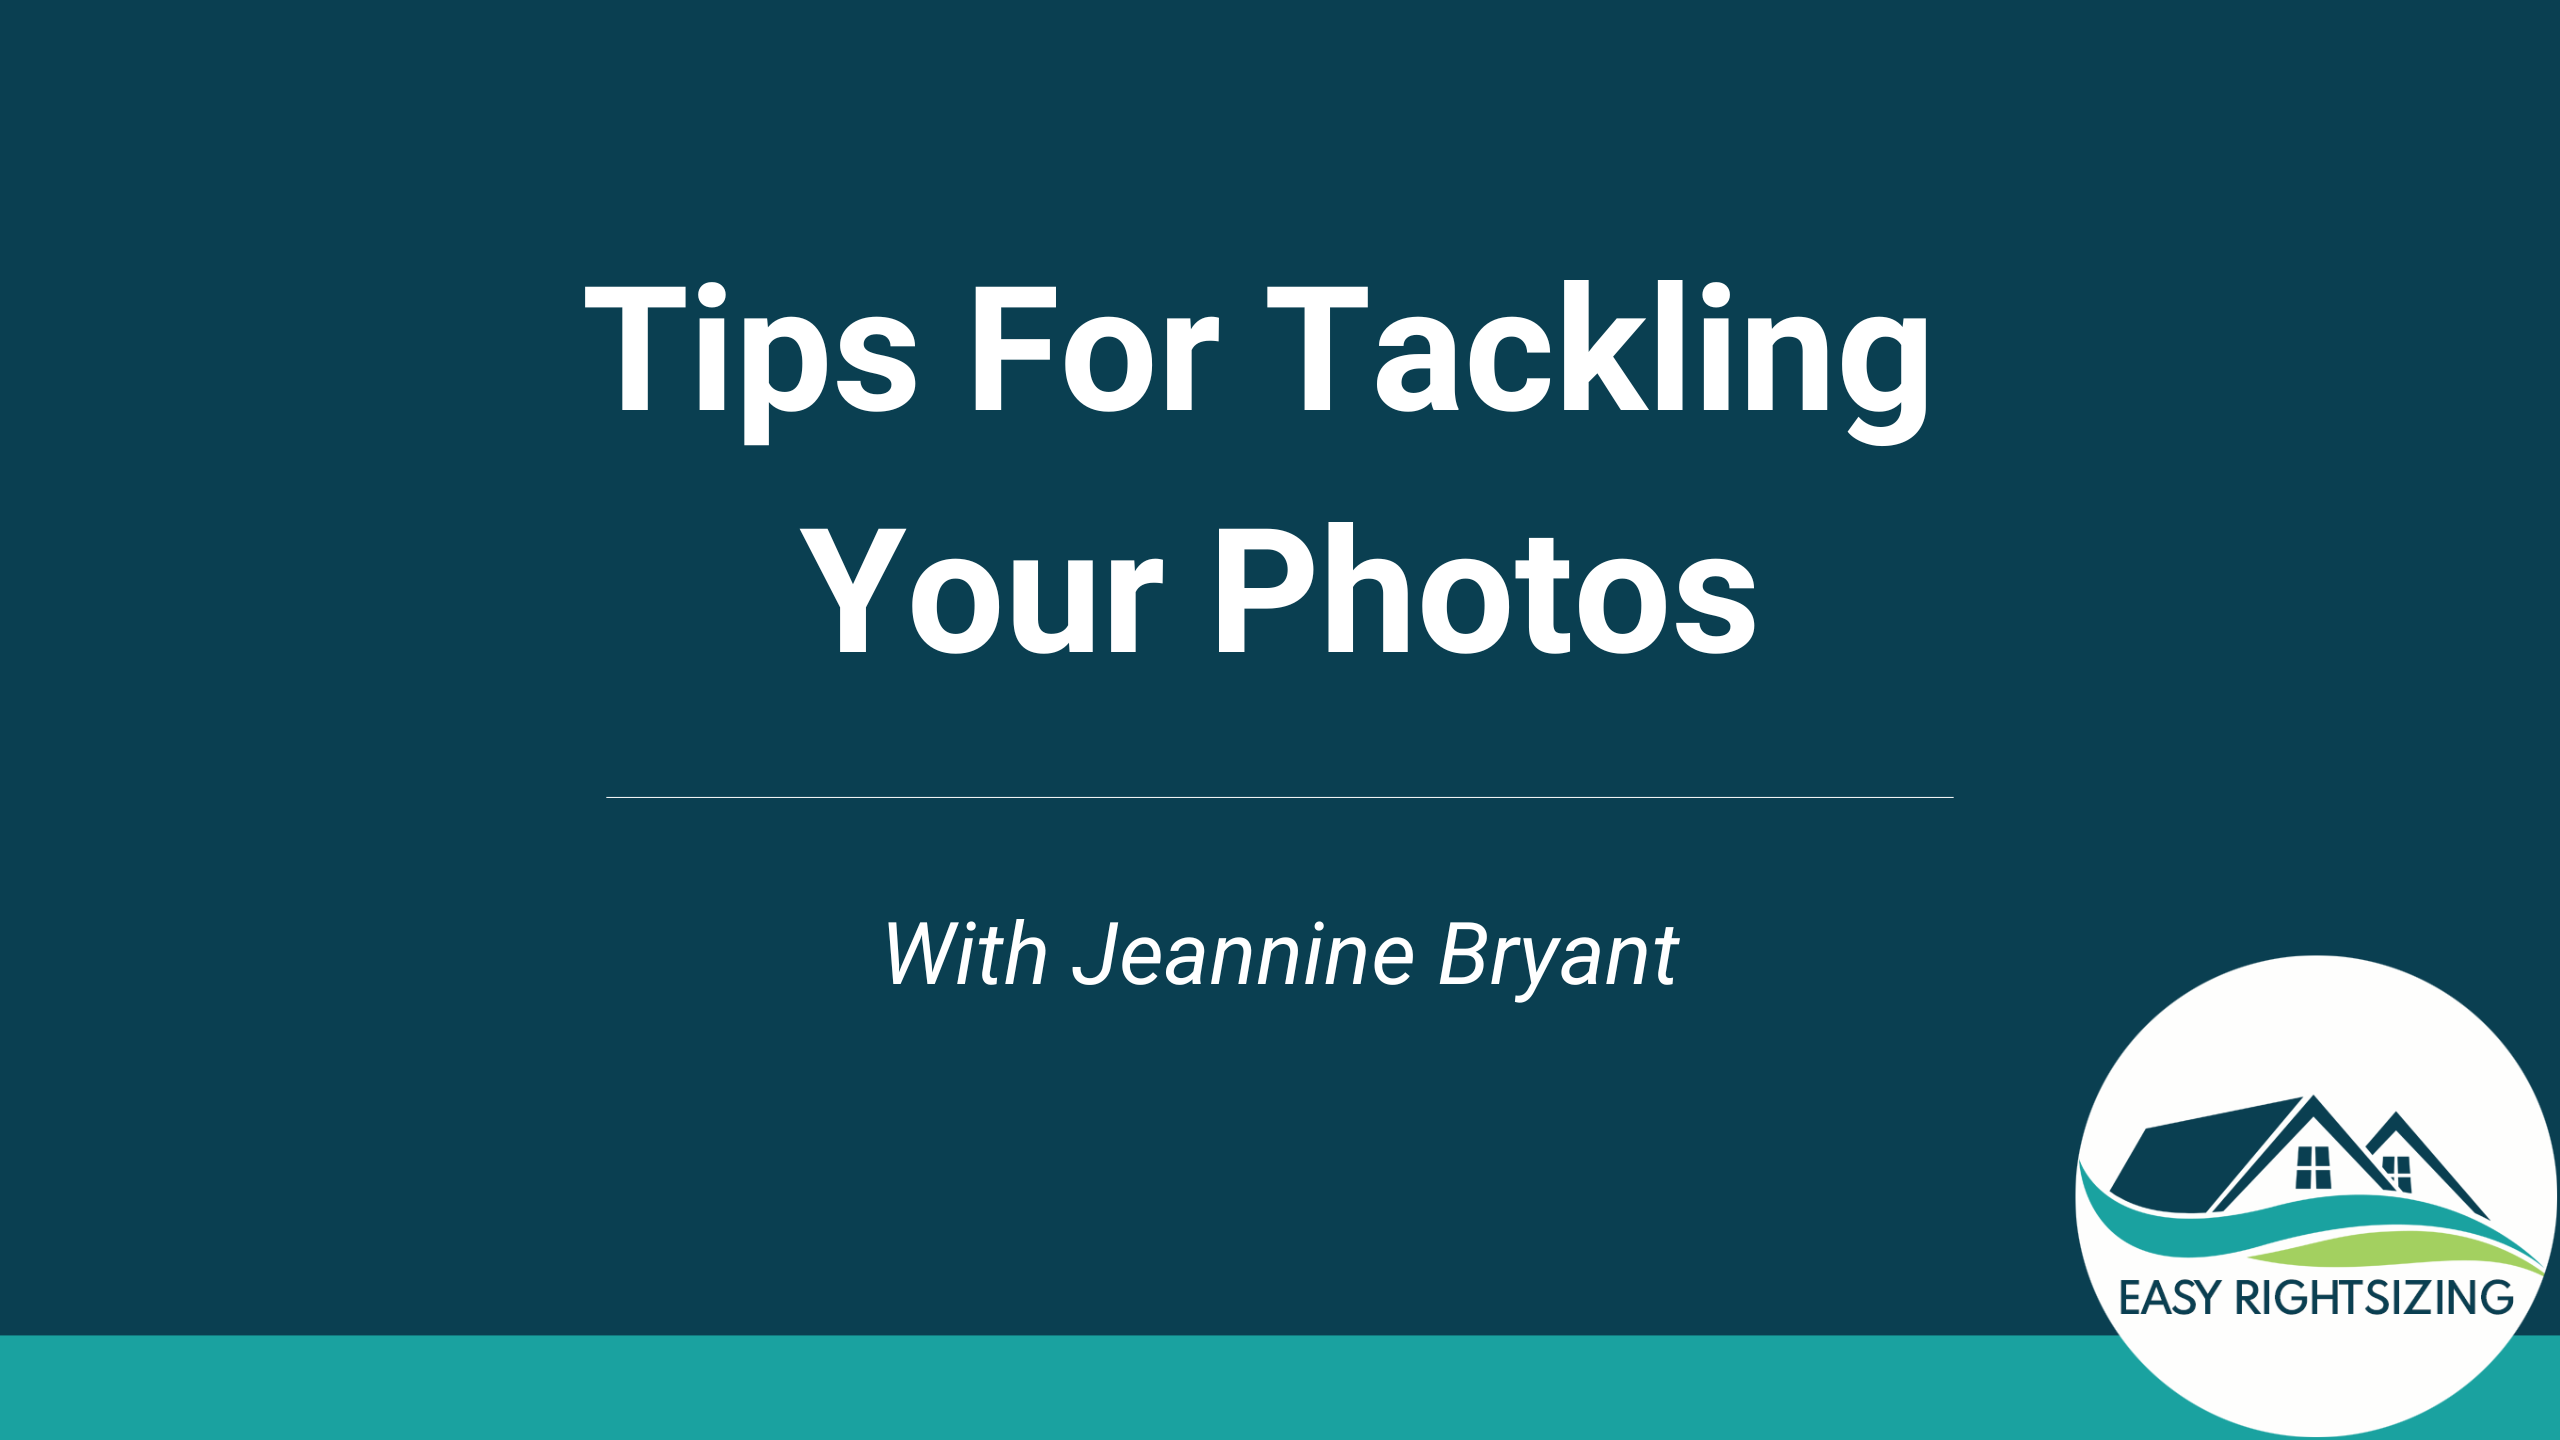 Tips For Tackling Your Photos